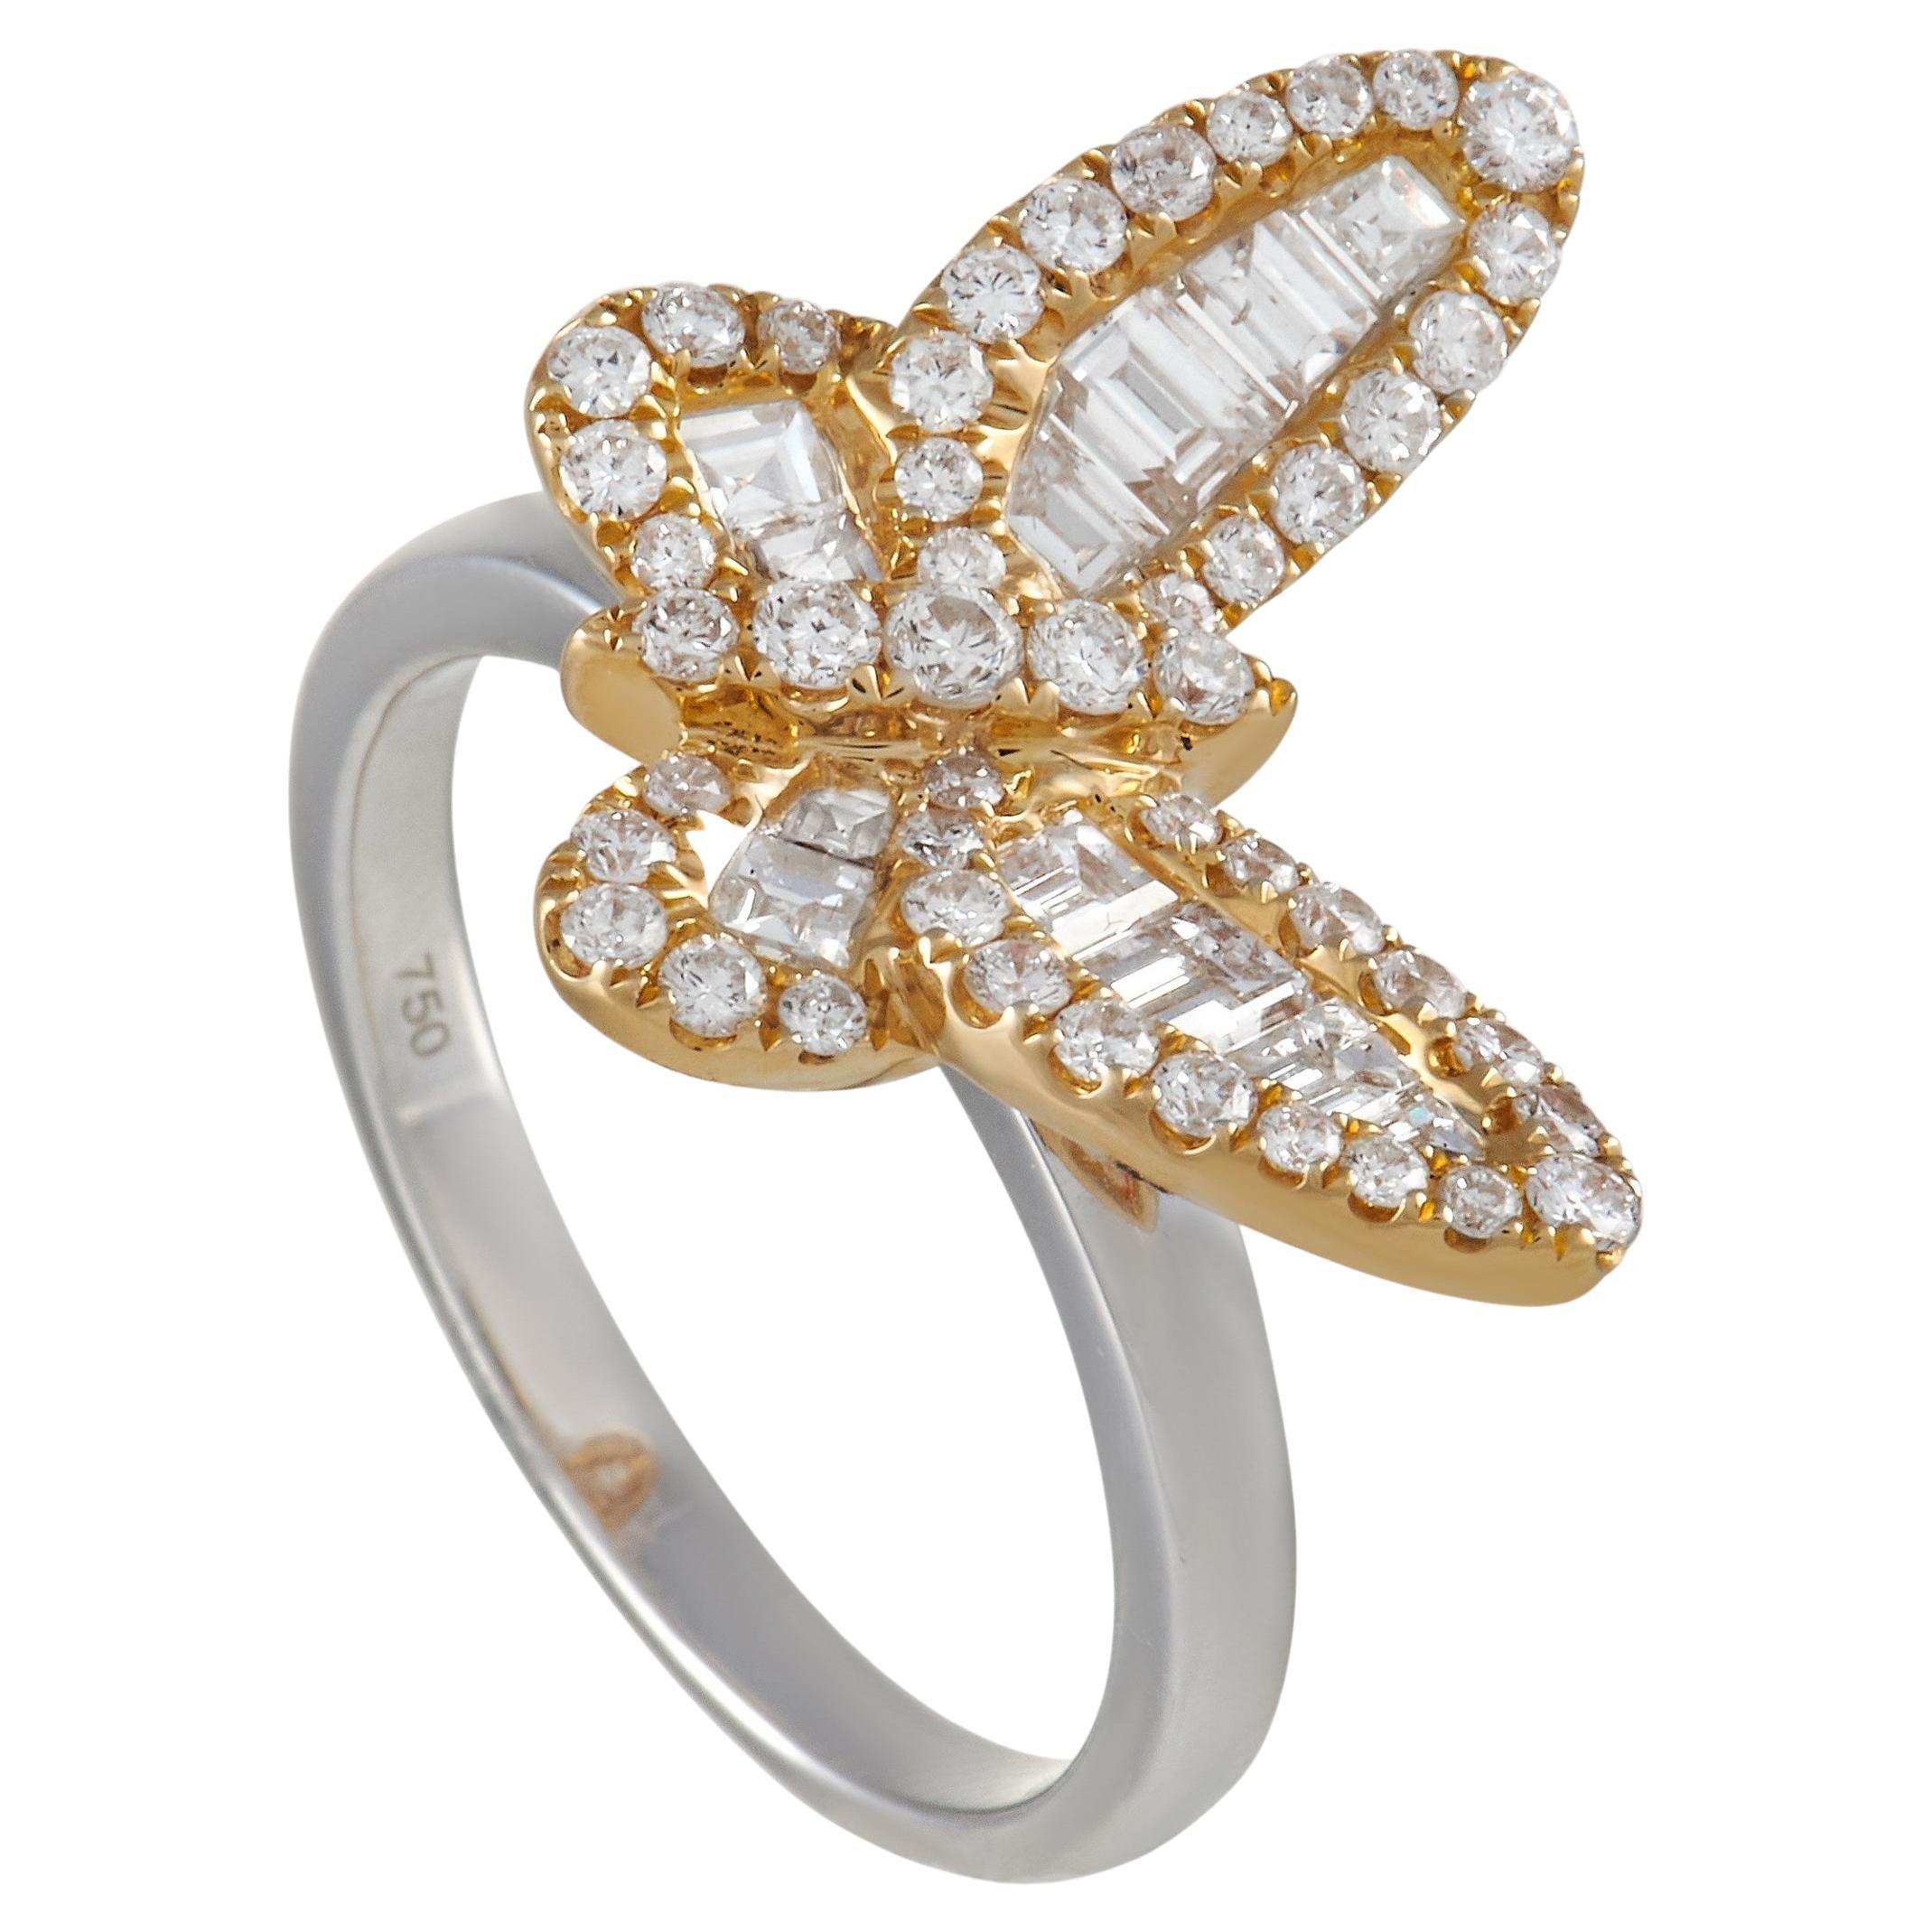 LB Exclusive 18K White and Yellow Gold 1.33 Ct Diamond Butterfly Ring For Sale